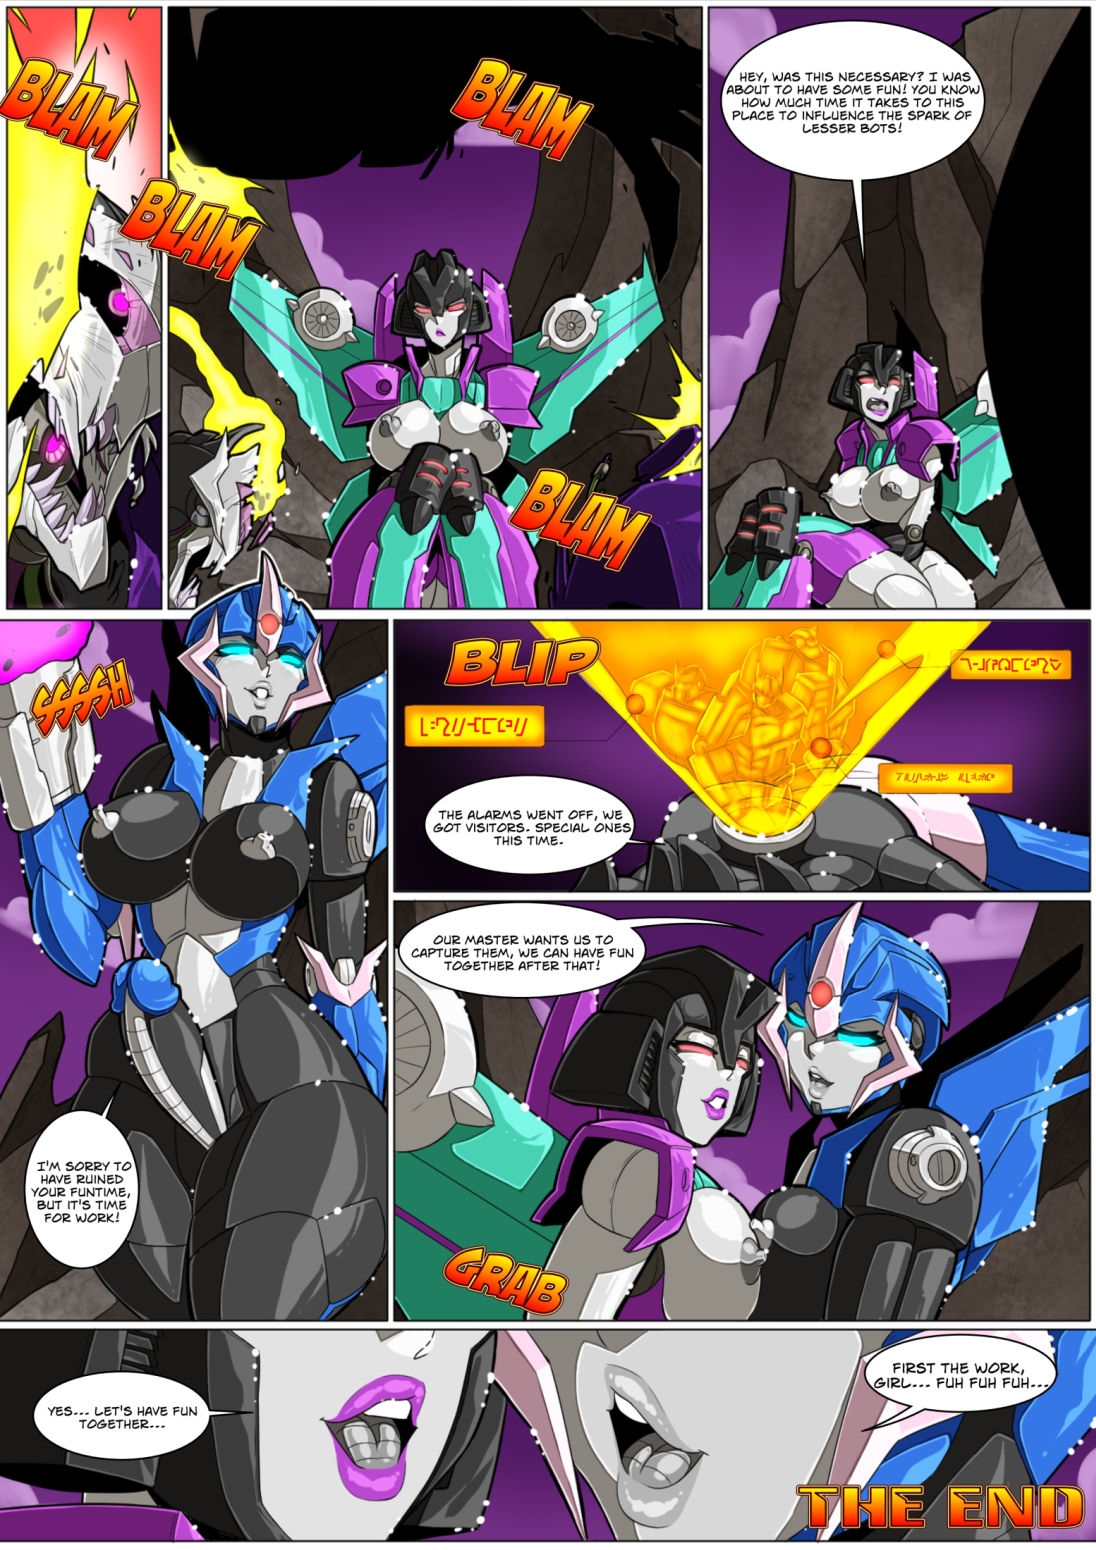 [MAD-Project] The Null Zone -Parallel- (Transformers) 8